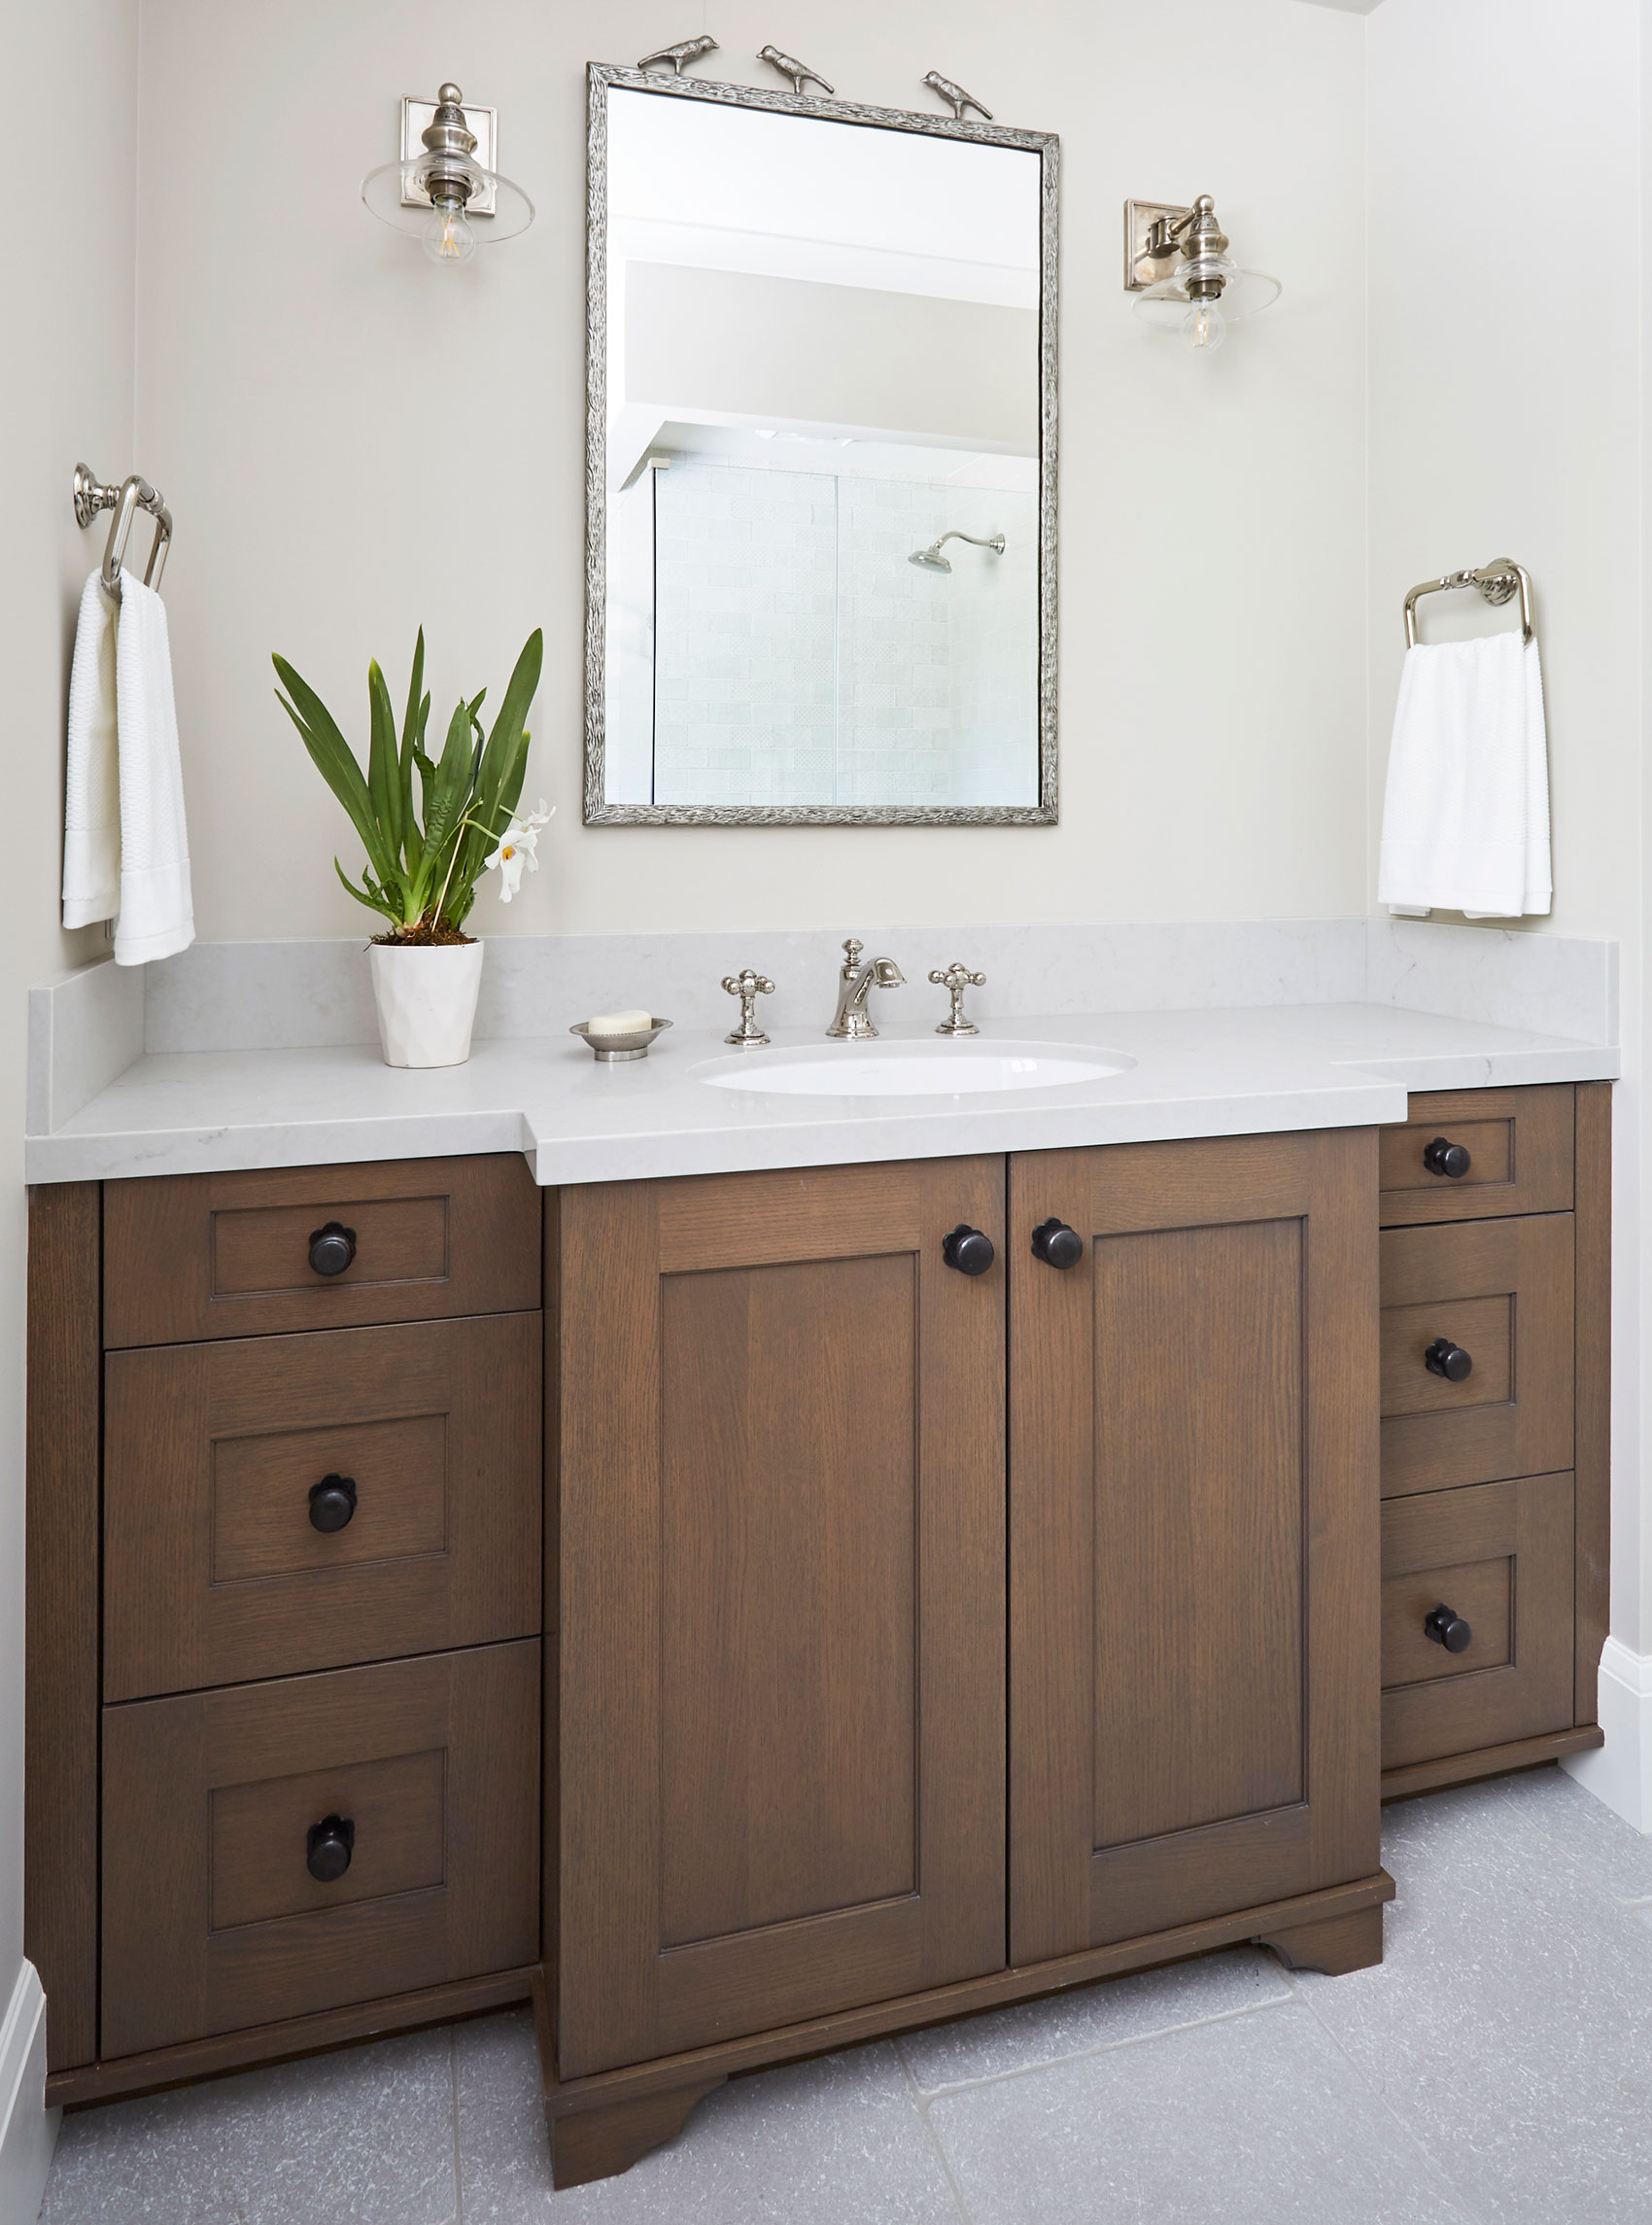  High-End Cabinets For Your East Bay Bathroom Remodel - Bathroom Remodel - Harmoni Cabinets - Custom Kitchens